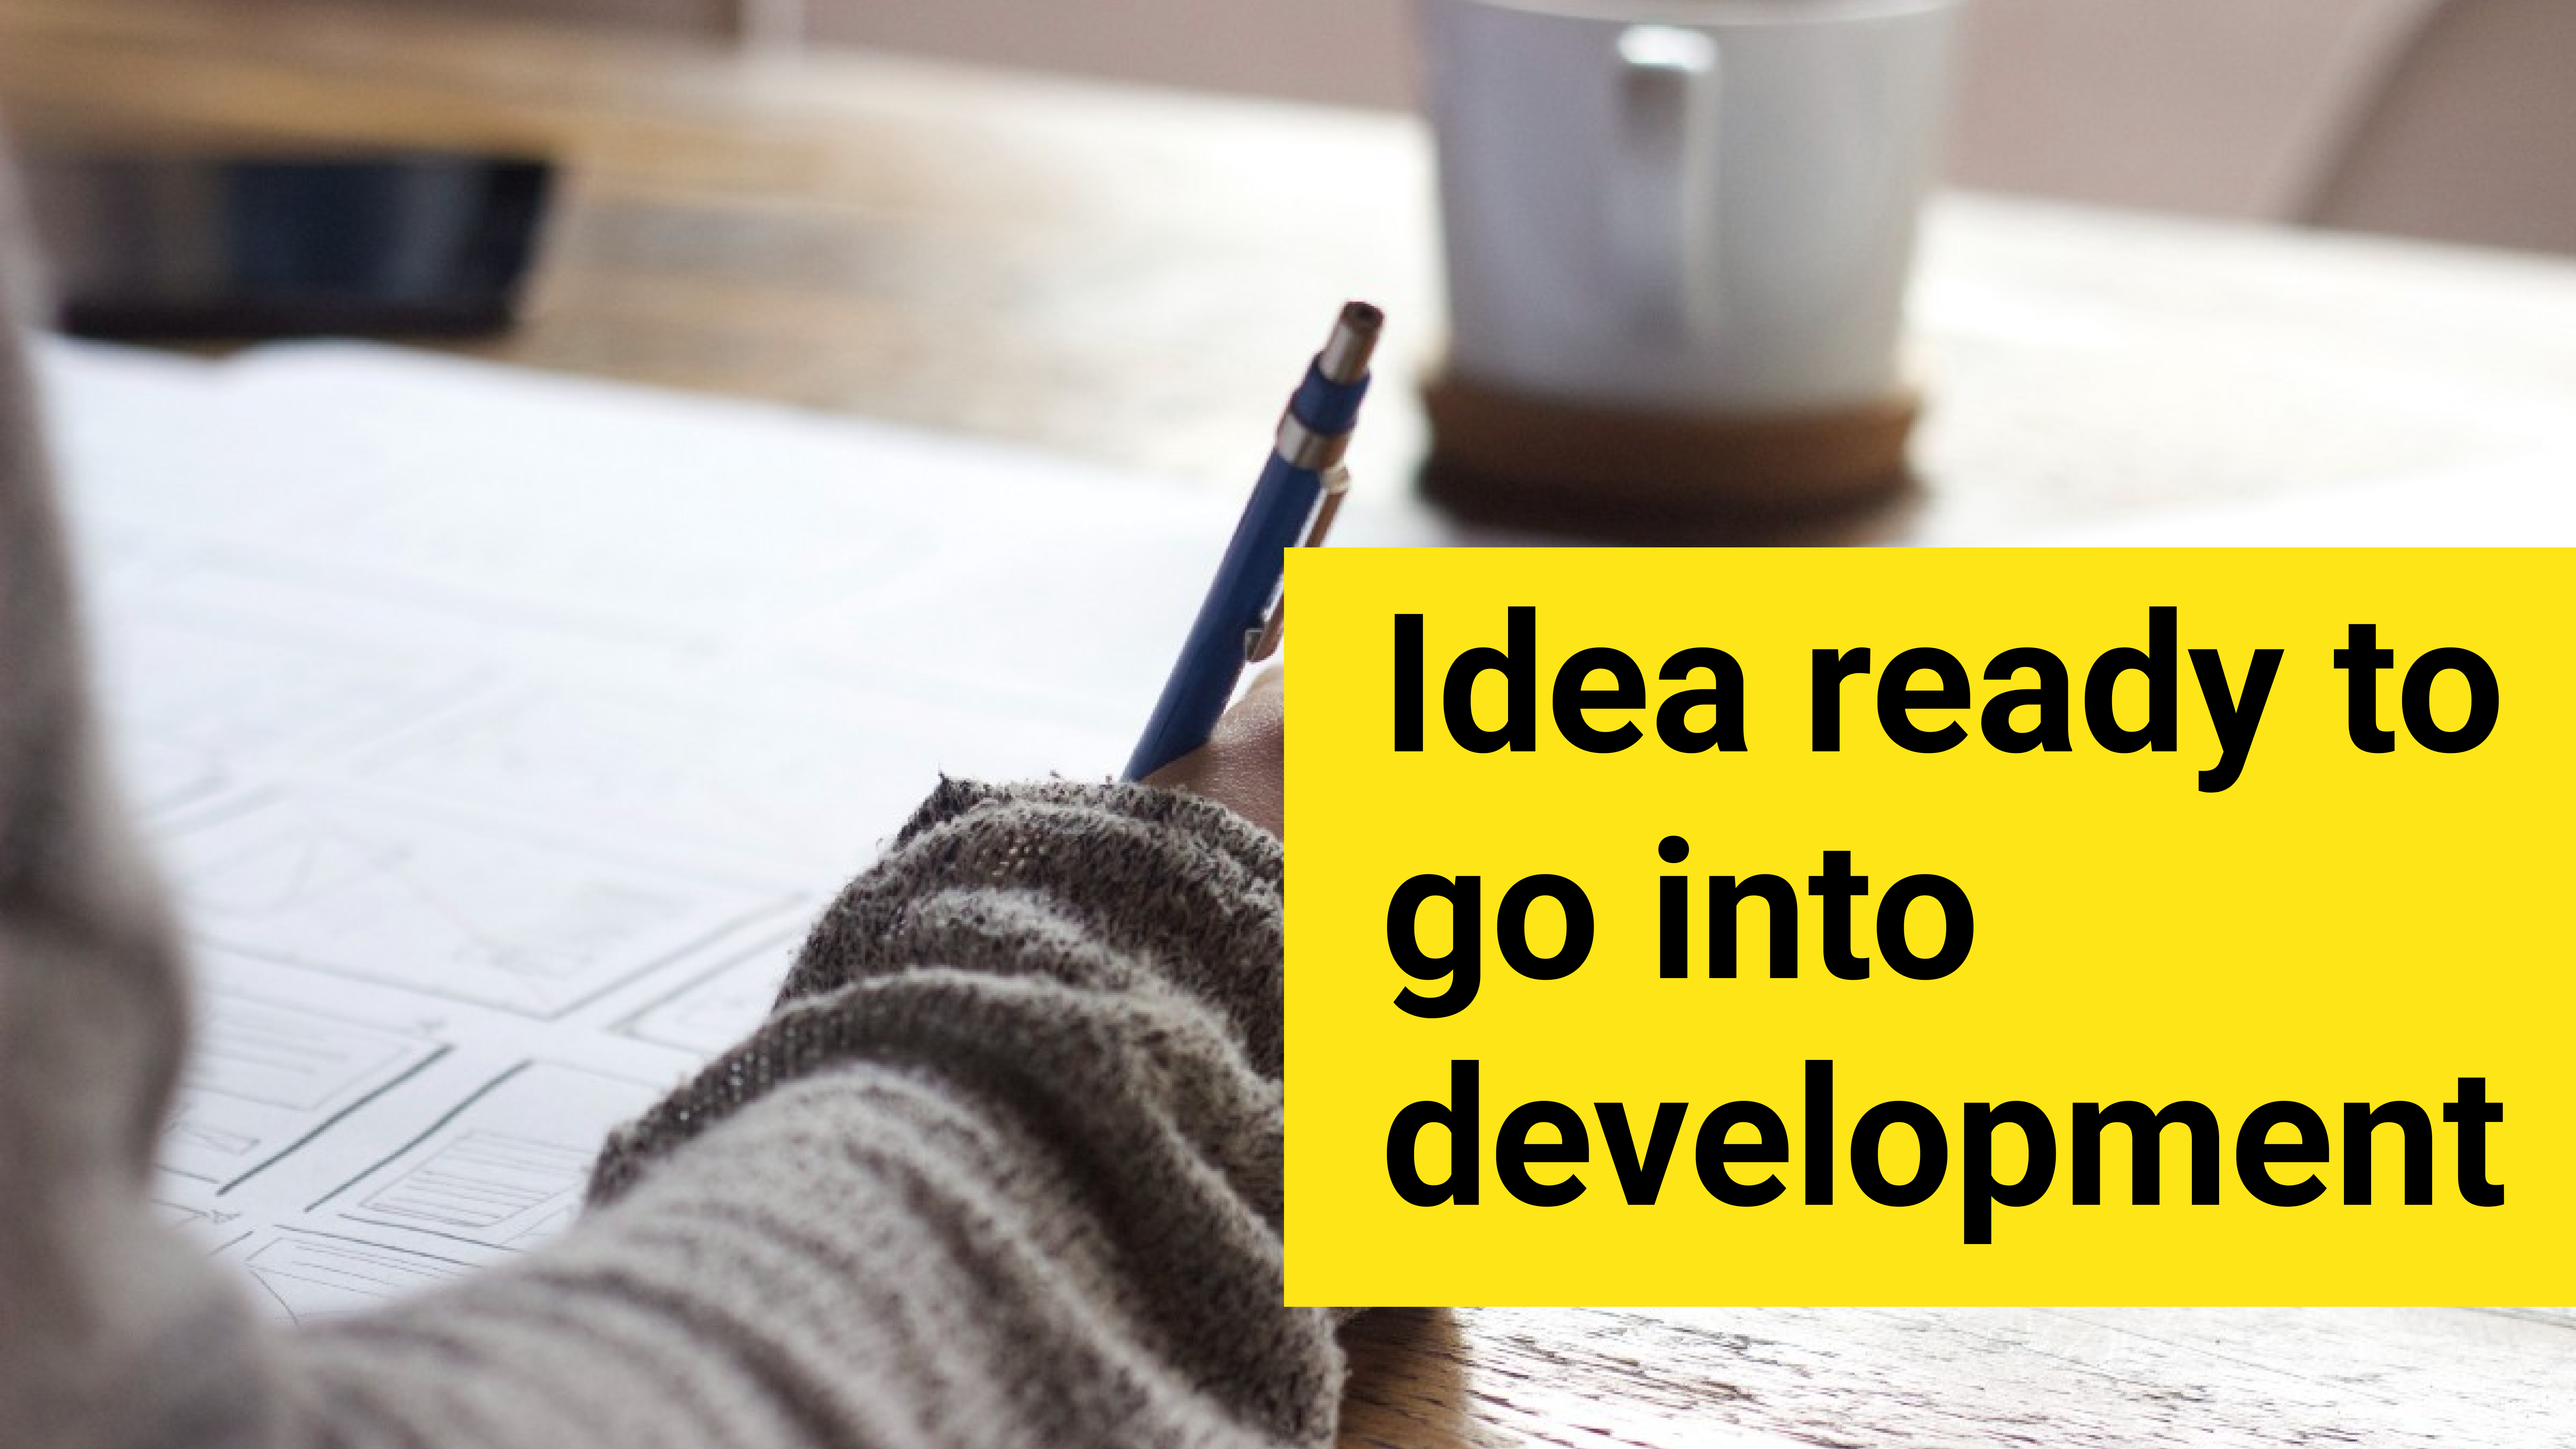 Must ask questions to yourself to ensure your idea is ready to go into development